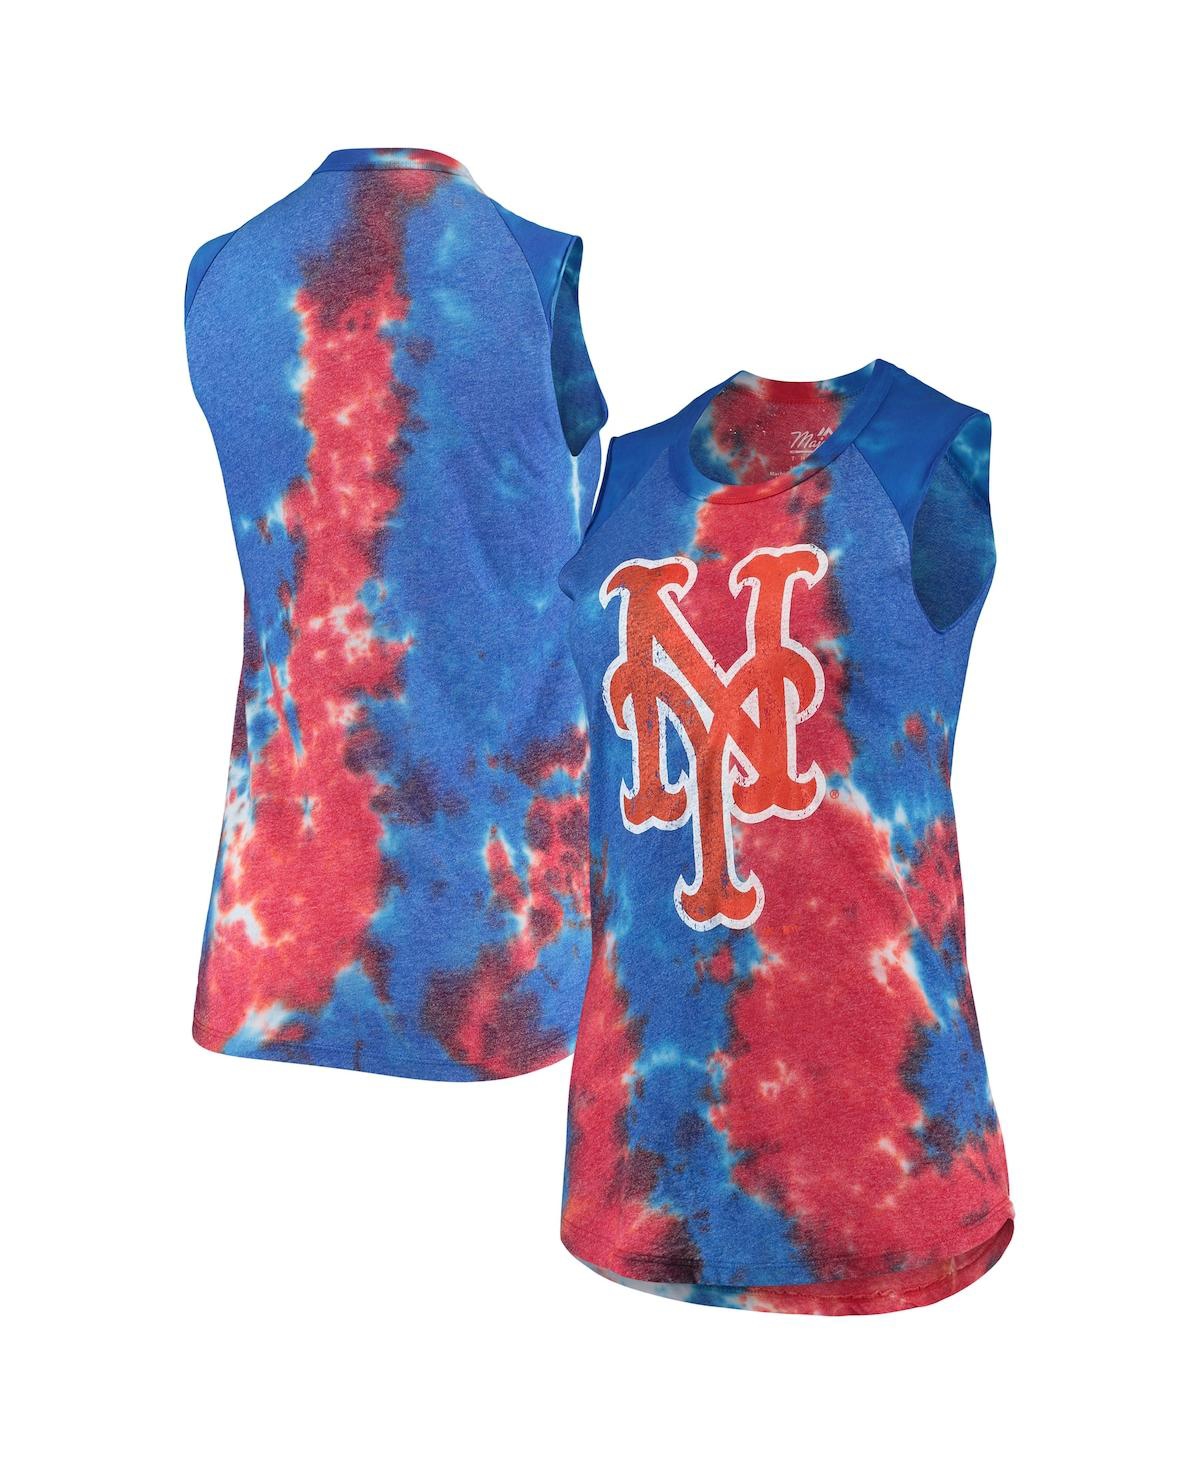 Women's Majestic Threads Red and Blue New York Mets Tie-Dye Tri-Blend Muscle Tank Top - Red, Blue